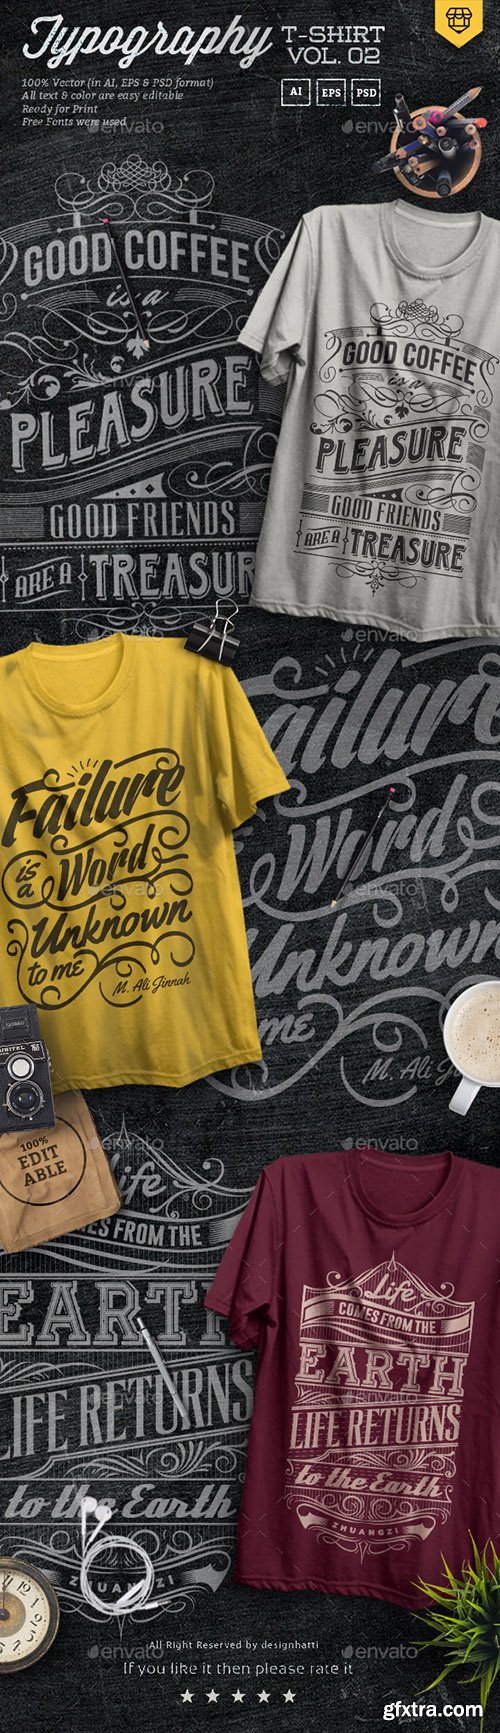 Graphicriver 3 Quote Typography T-Shirts Vol.02 19295960